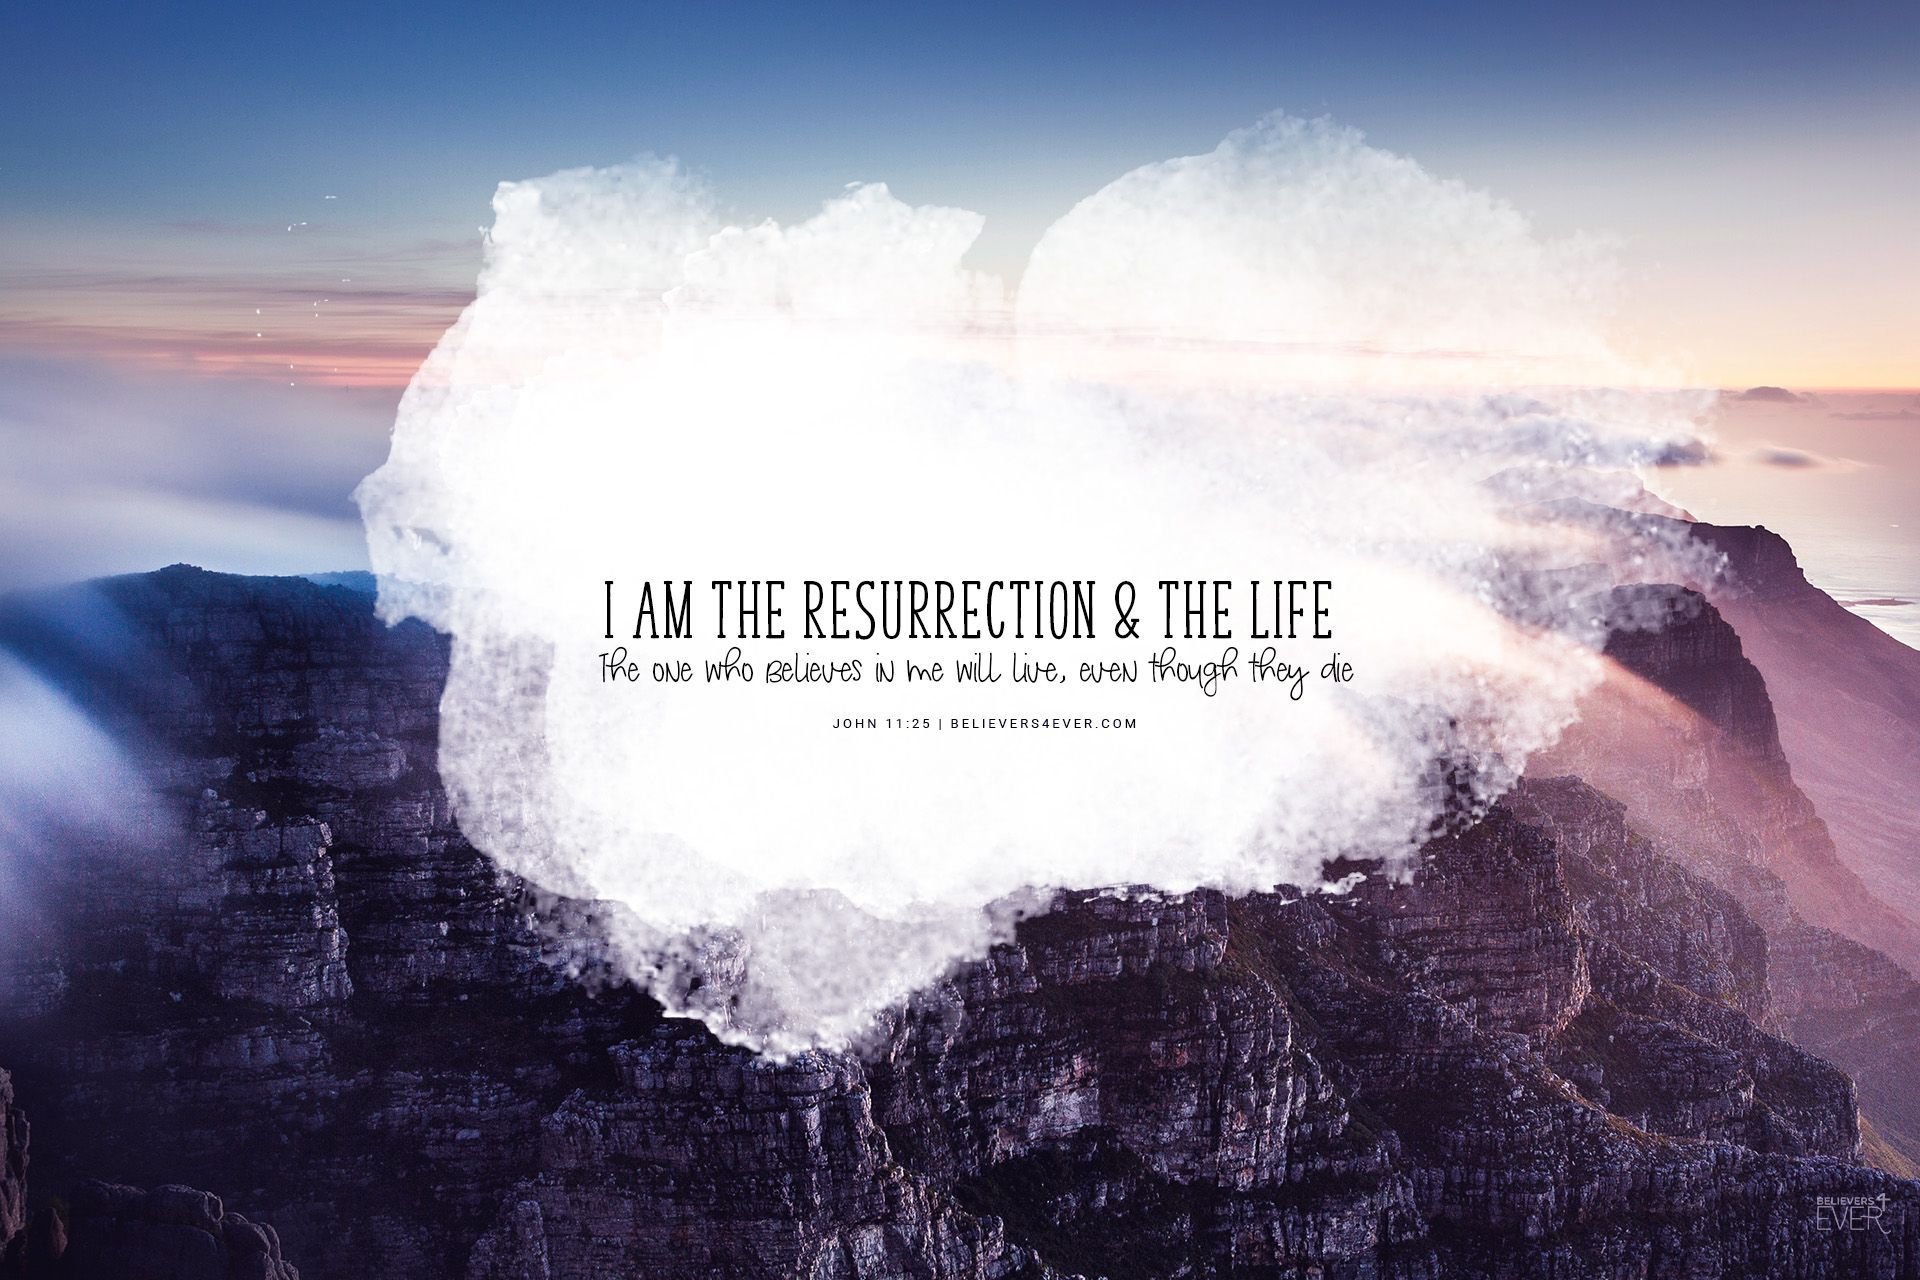 I am the resurrection and the life. Christian wallpaper